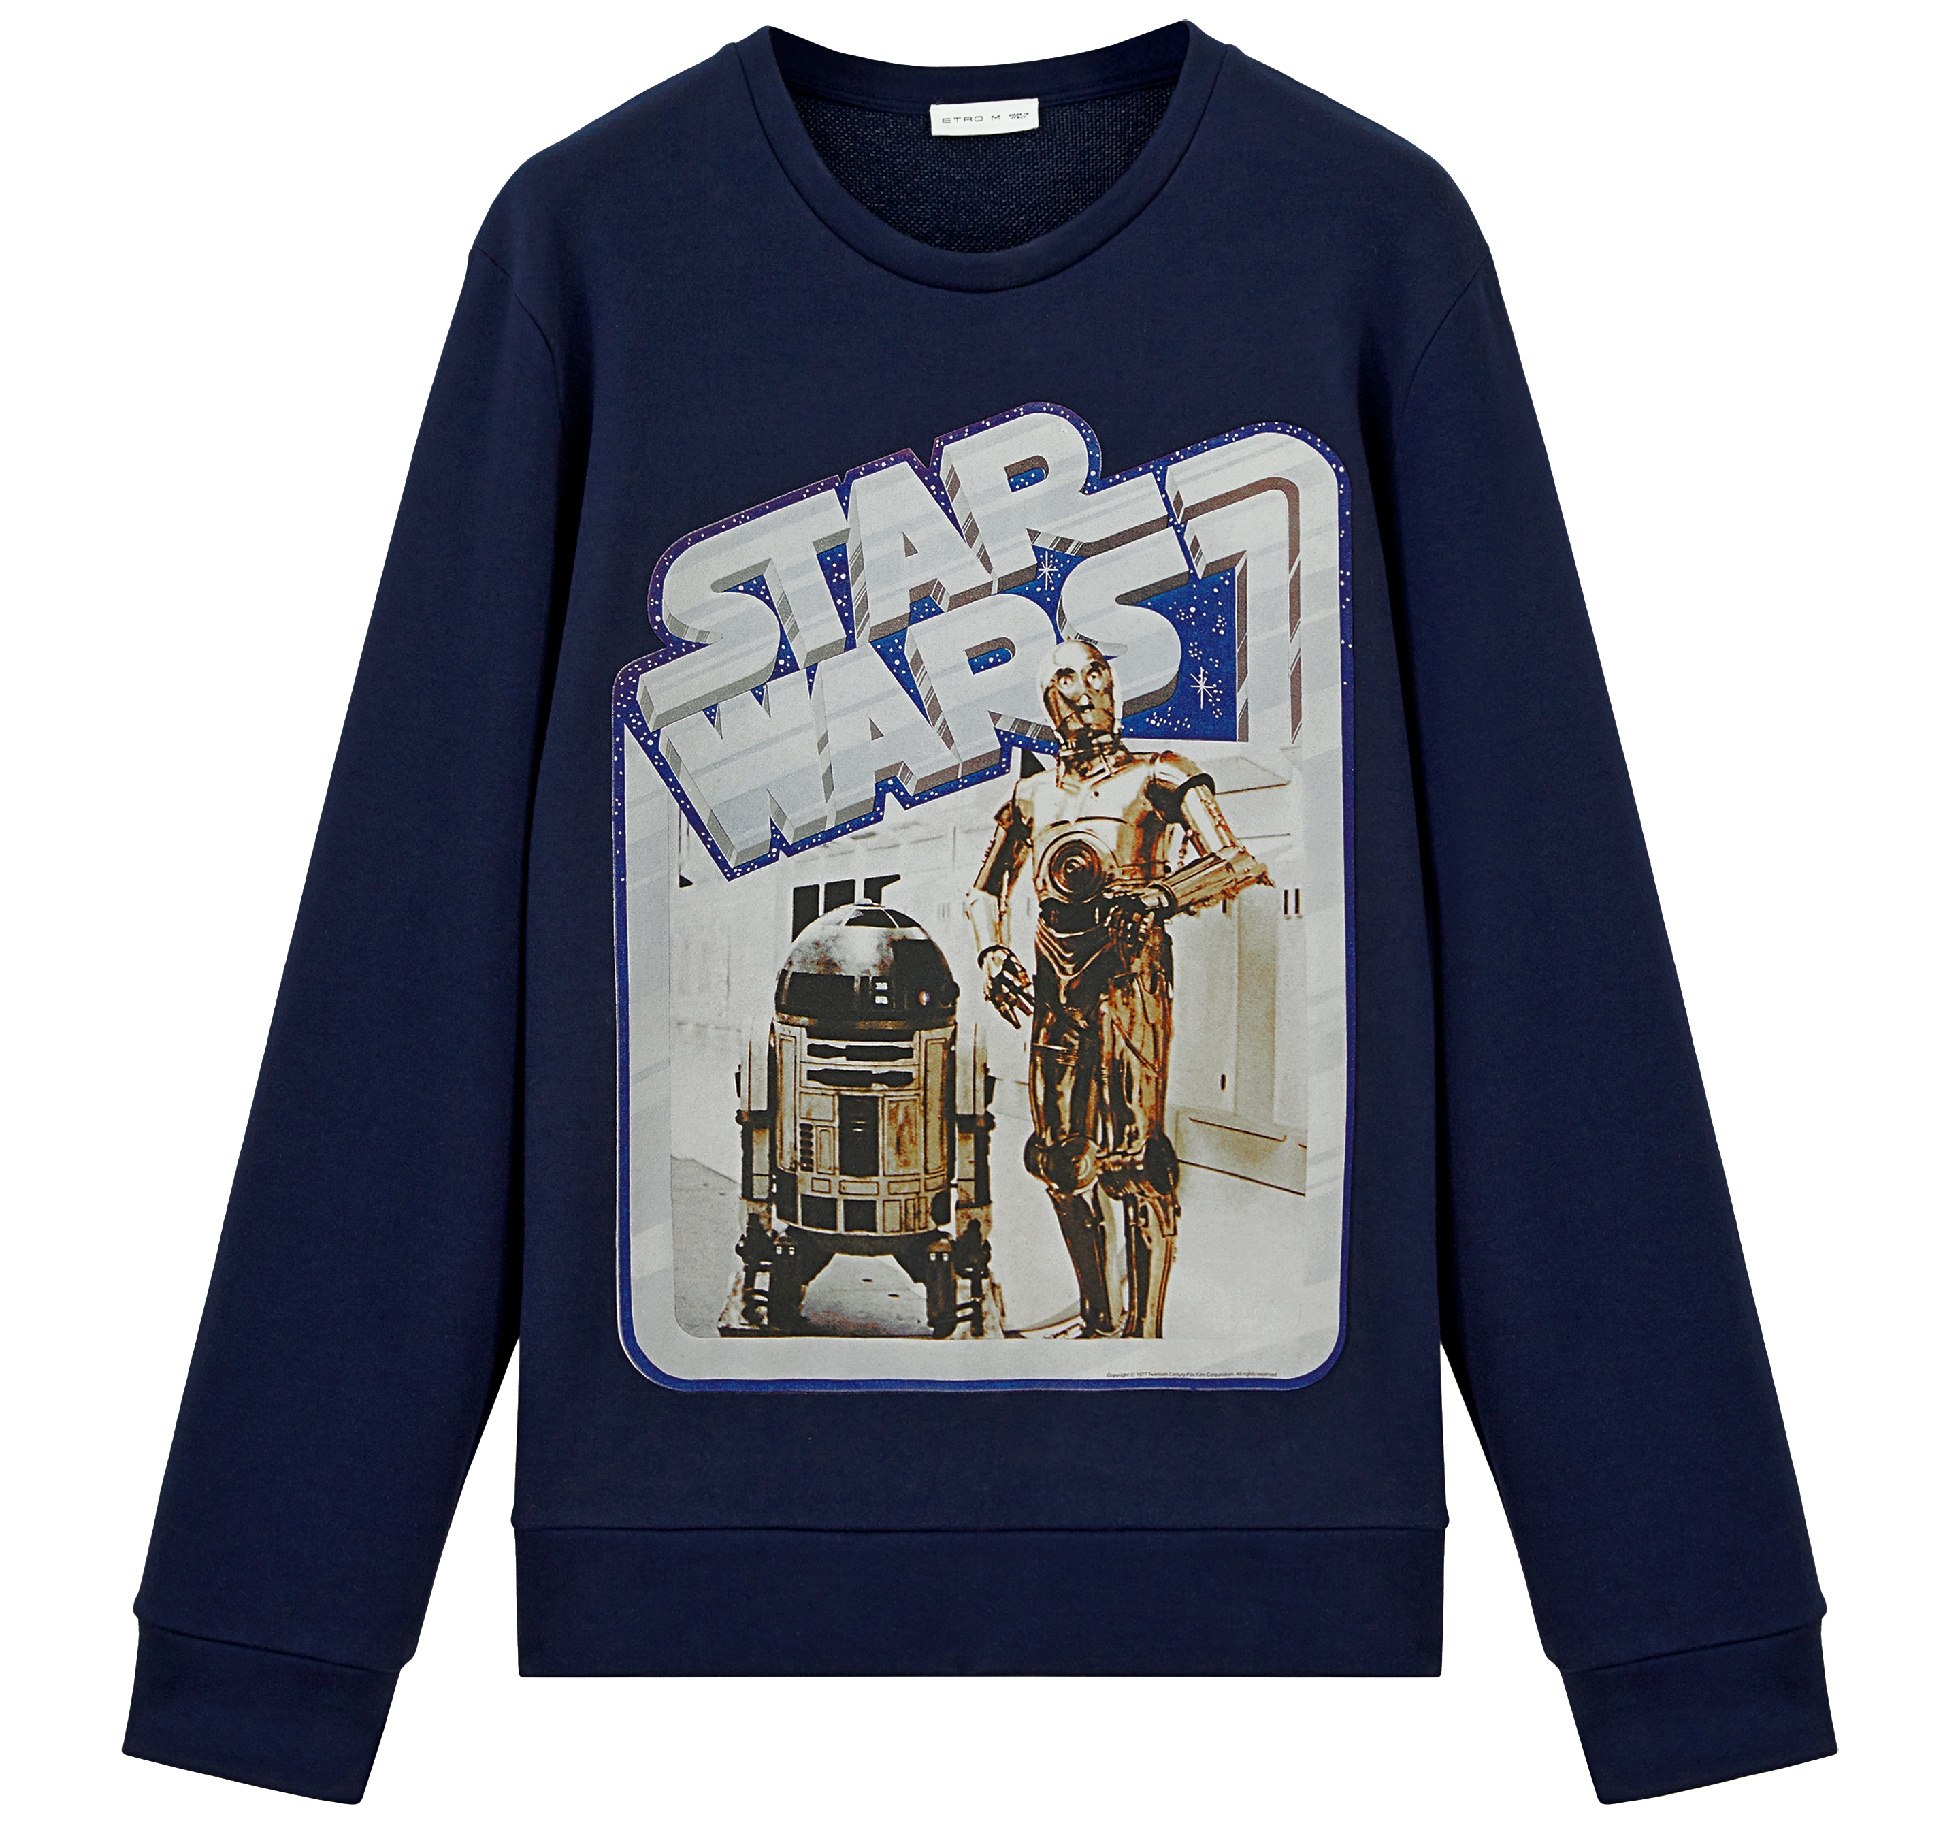 ETRO X STAR WARS black sweater featuring droids R2D2 and C3PO